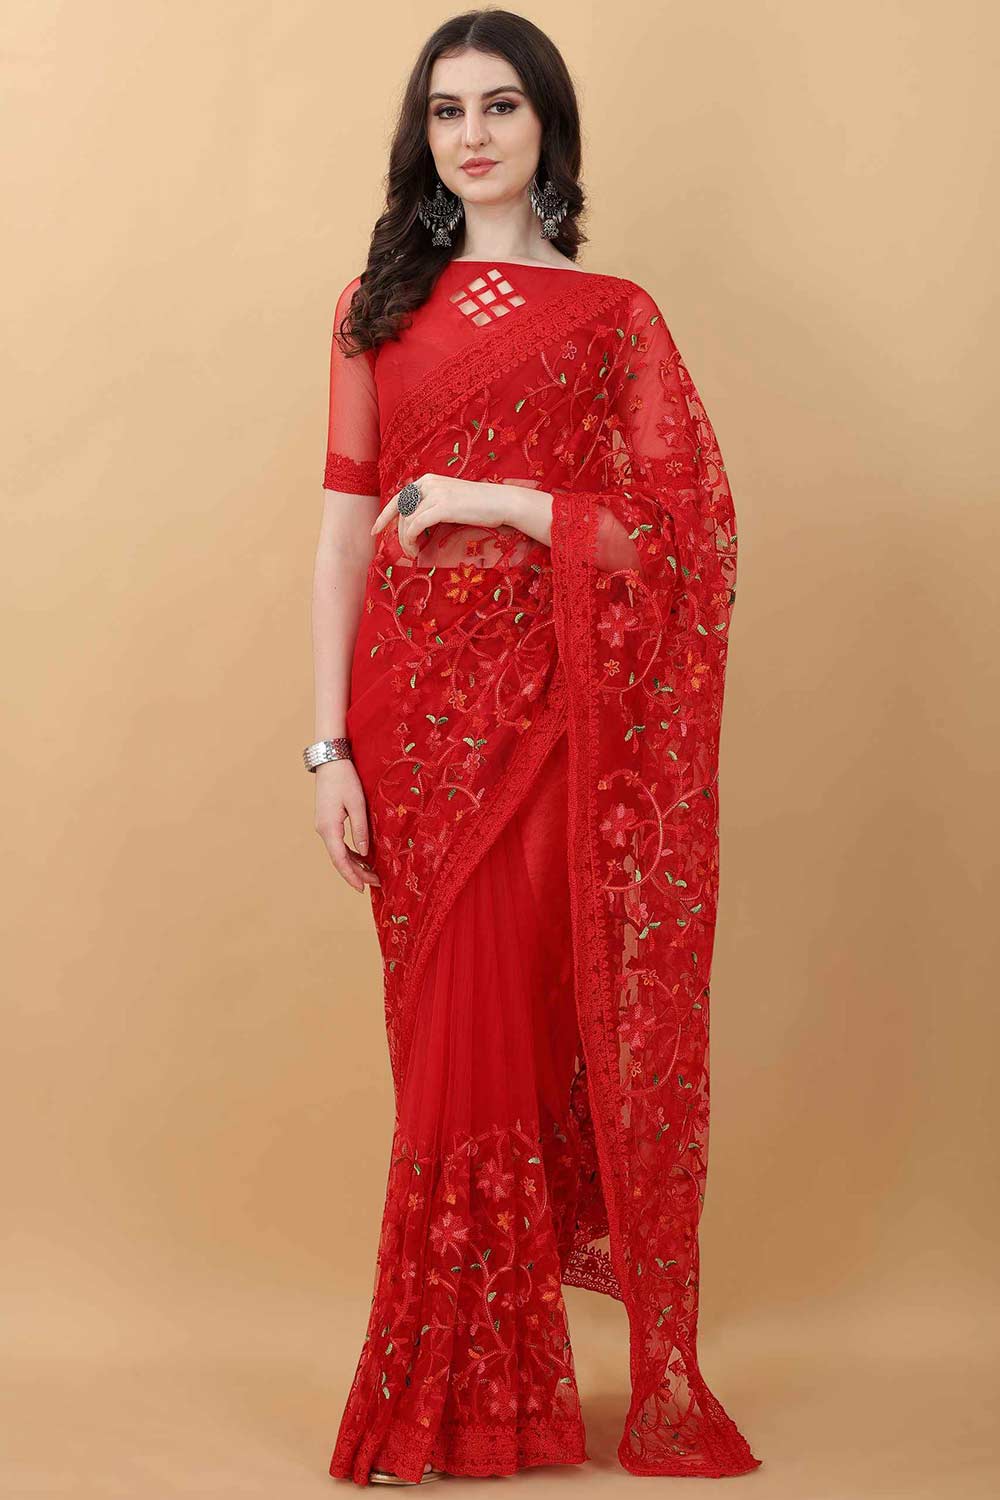 Designer Embroidery Net Red Floral Saree